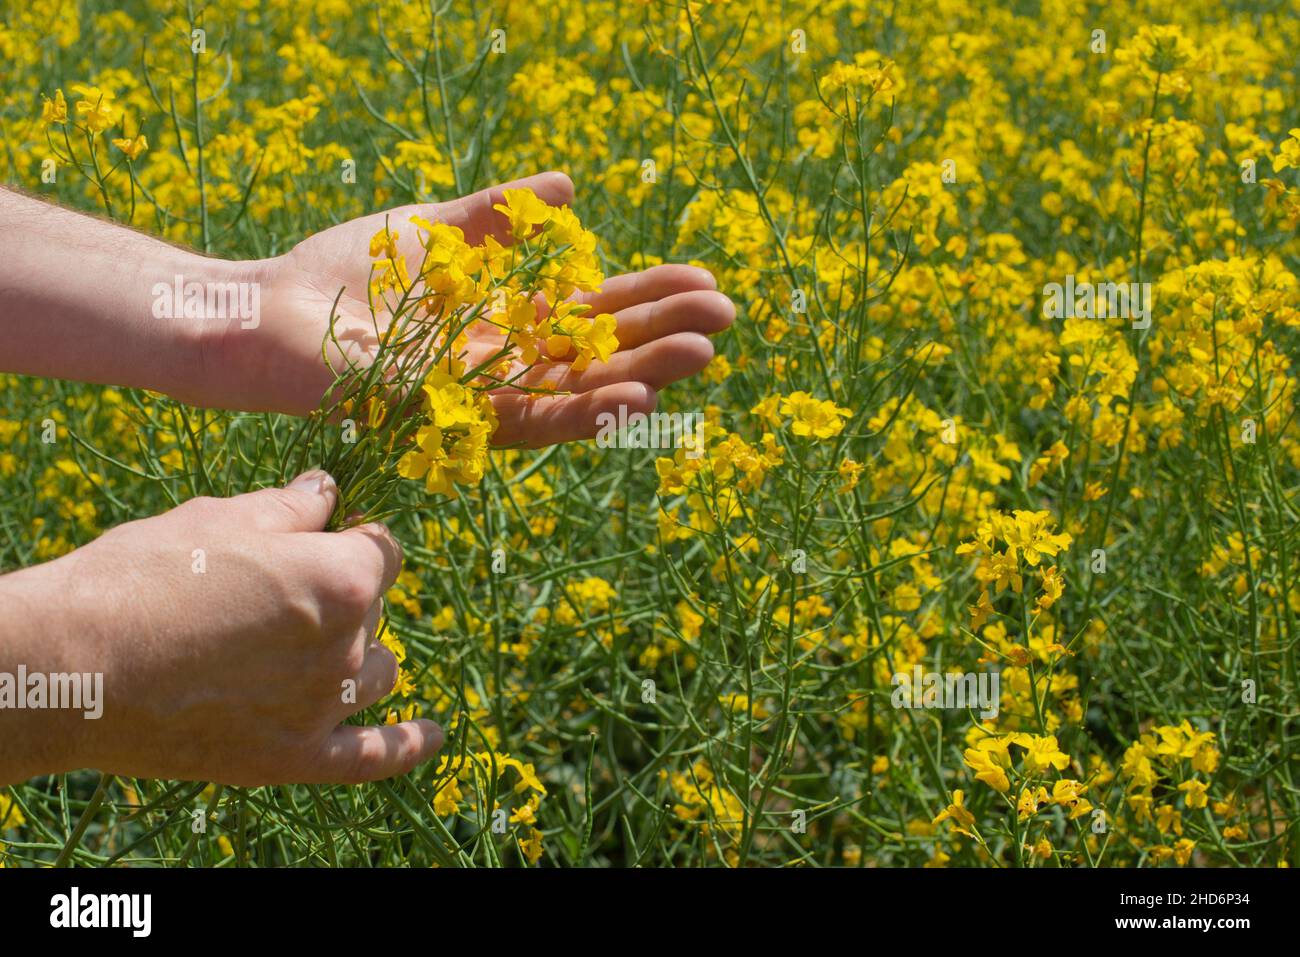 Canola flowers being held in human hand on oilseed feeld background. Stock Photo